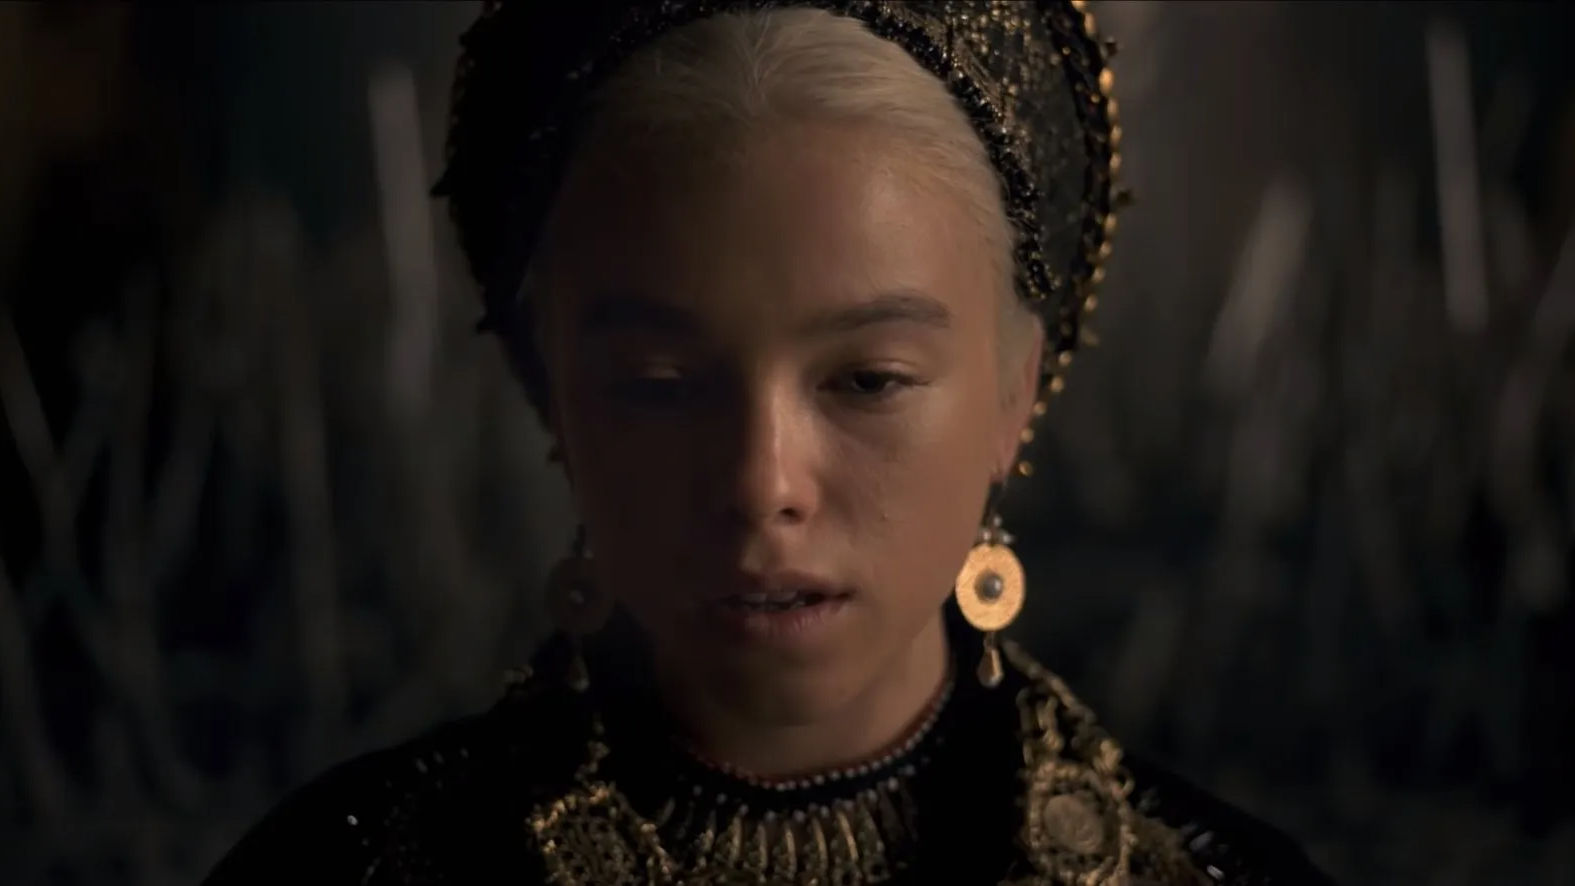 Game of Thrones prequel trailer out now. Watch